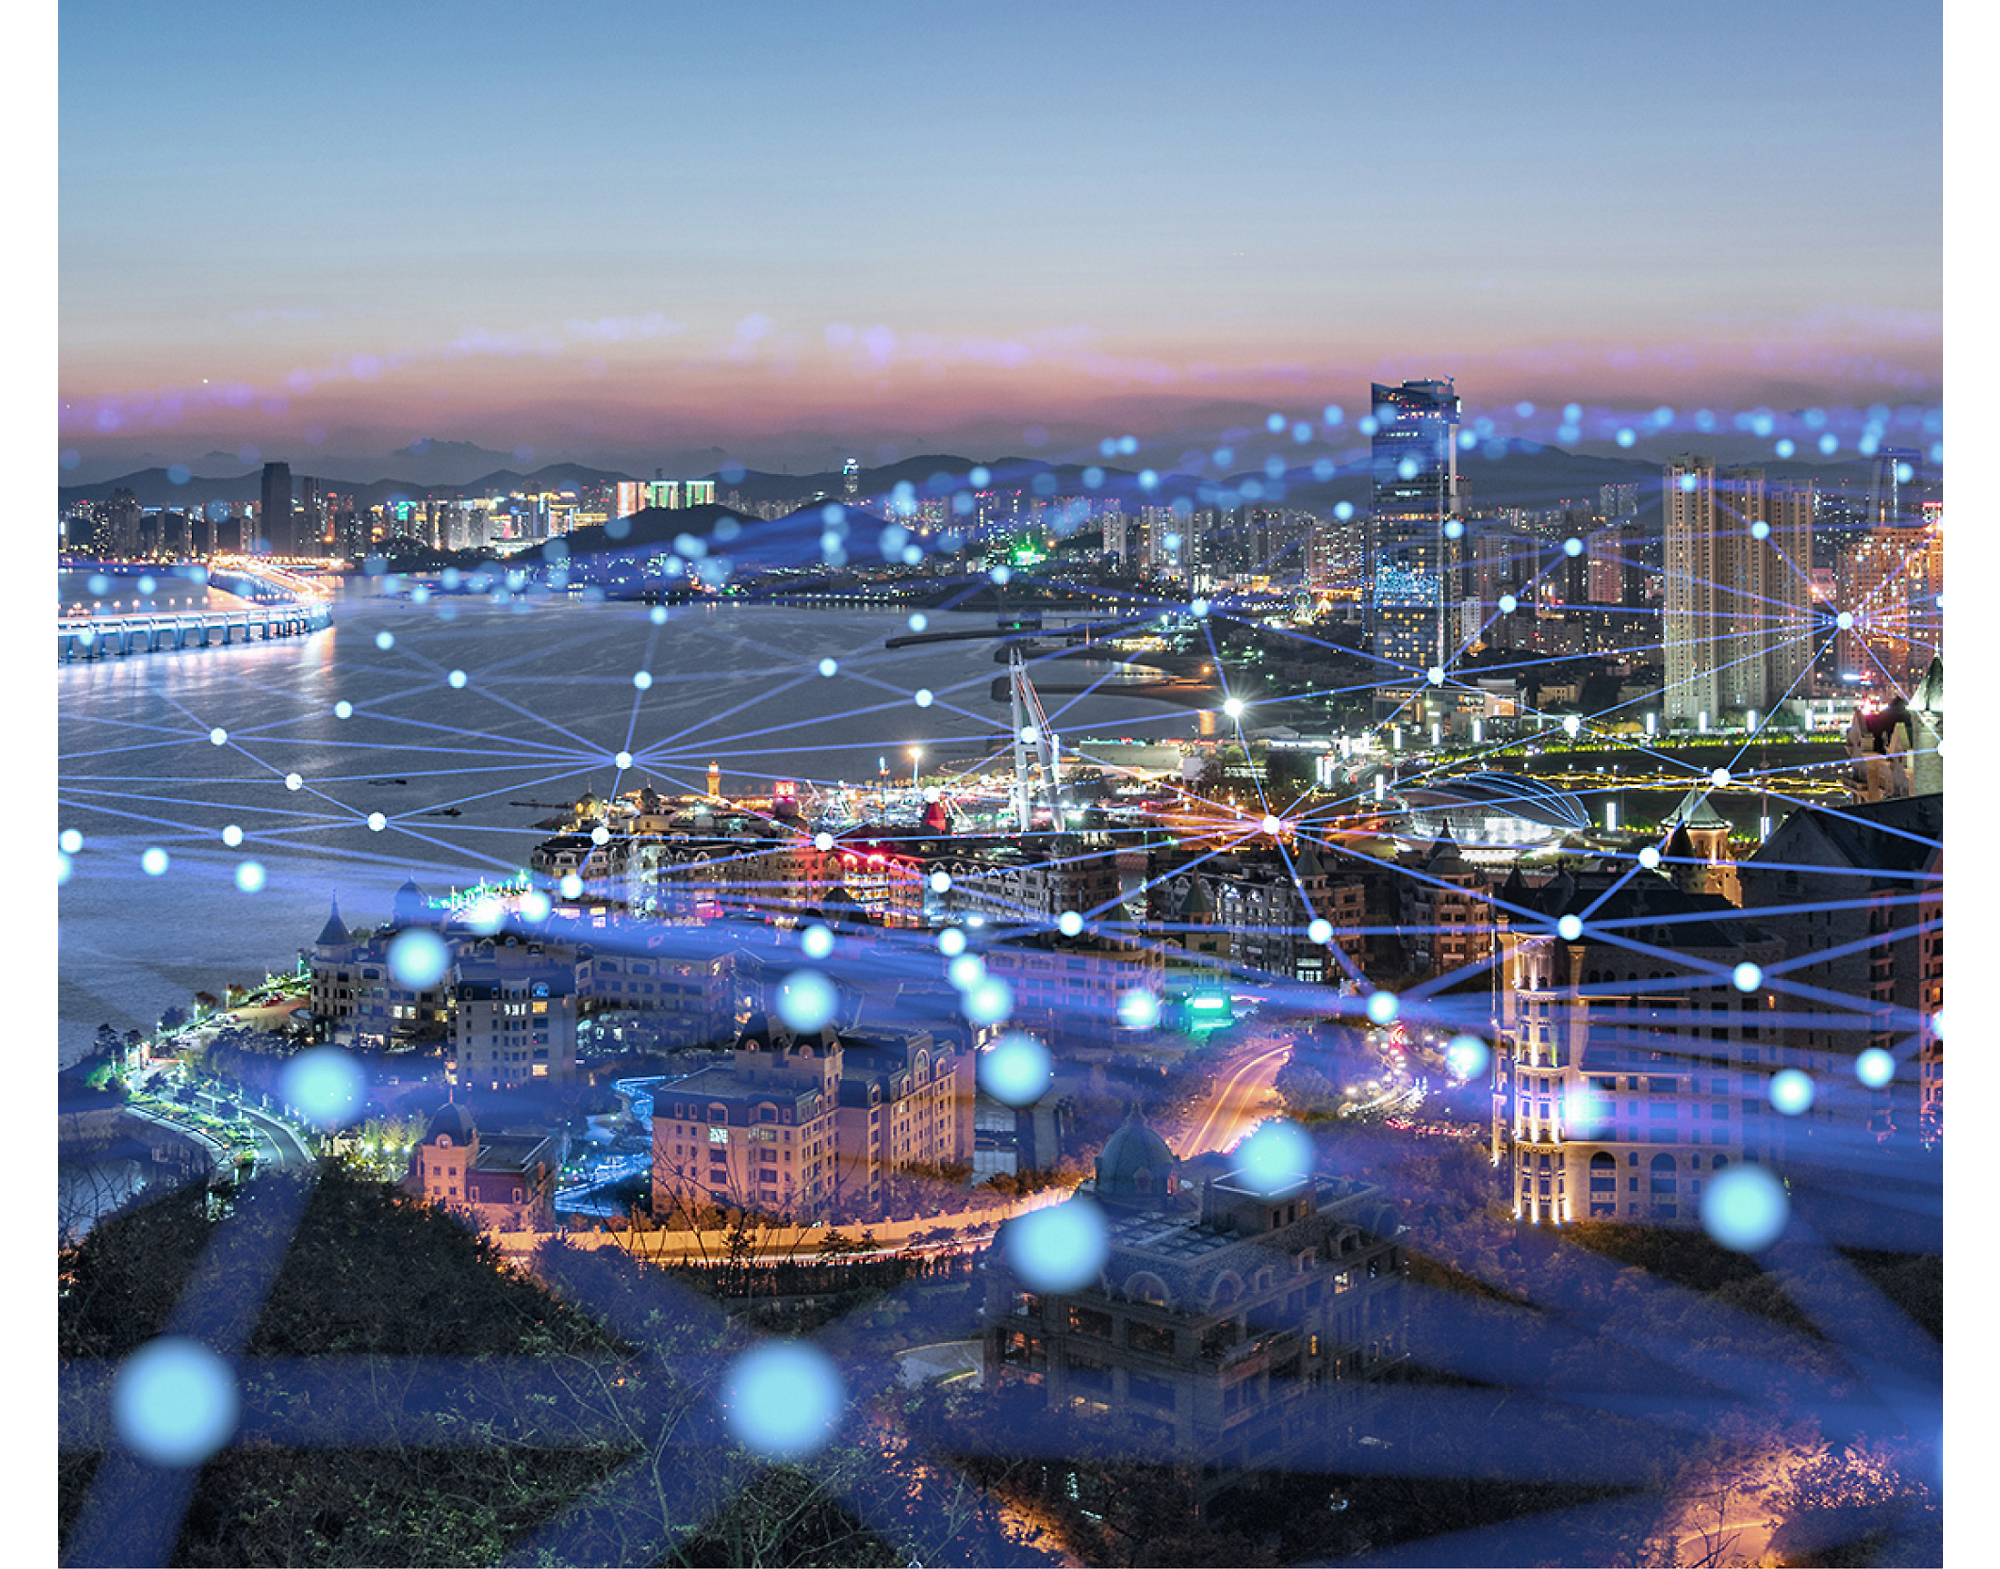 Aerial view of a coastal city at dusk, showcasing illuminated streets and buildings, overlaid with a glowing digital network grid.